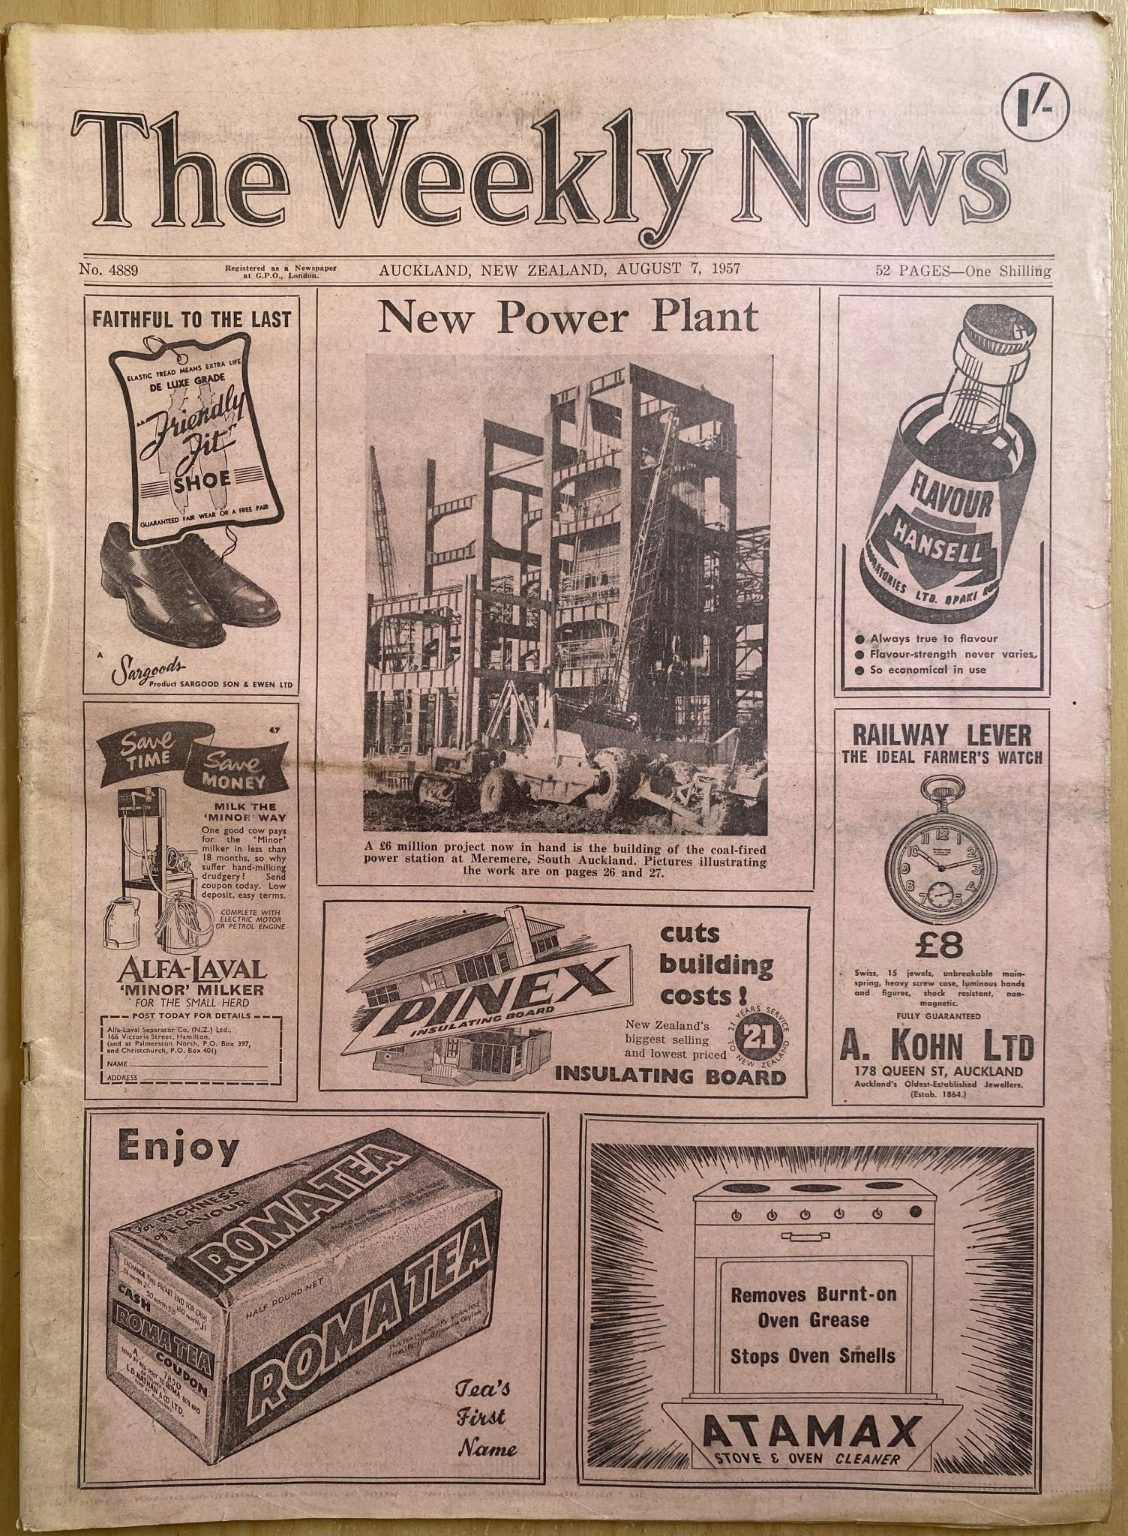 OLD NEWSPAPER: The Weekly News, No. 4889, 7 August 1957